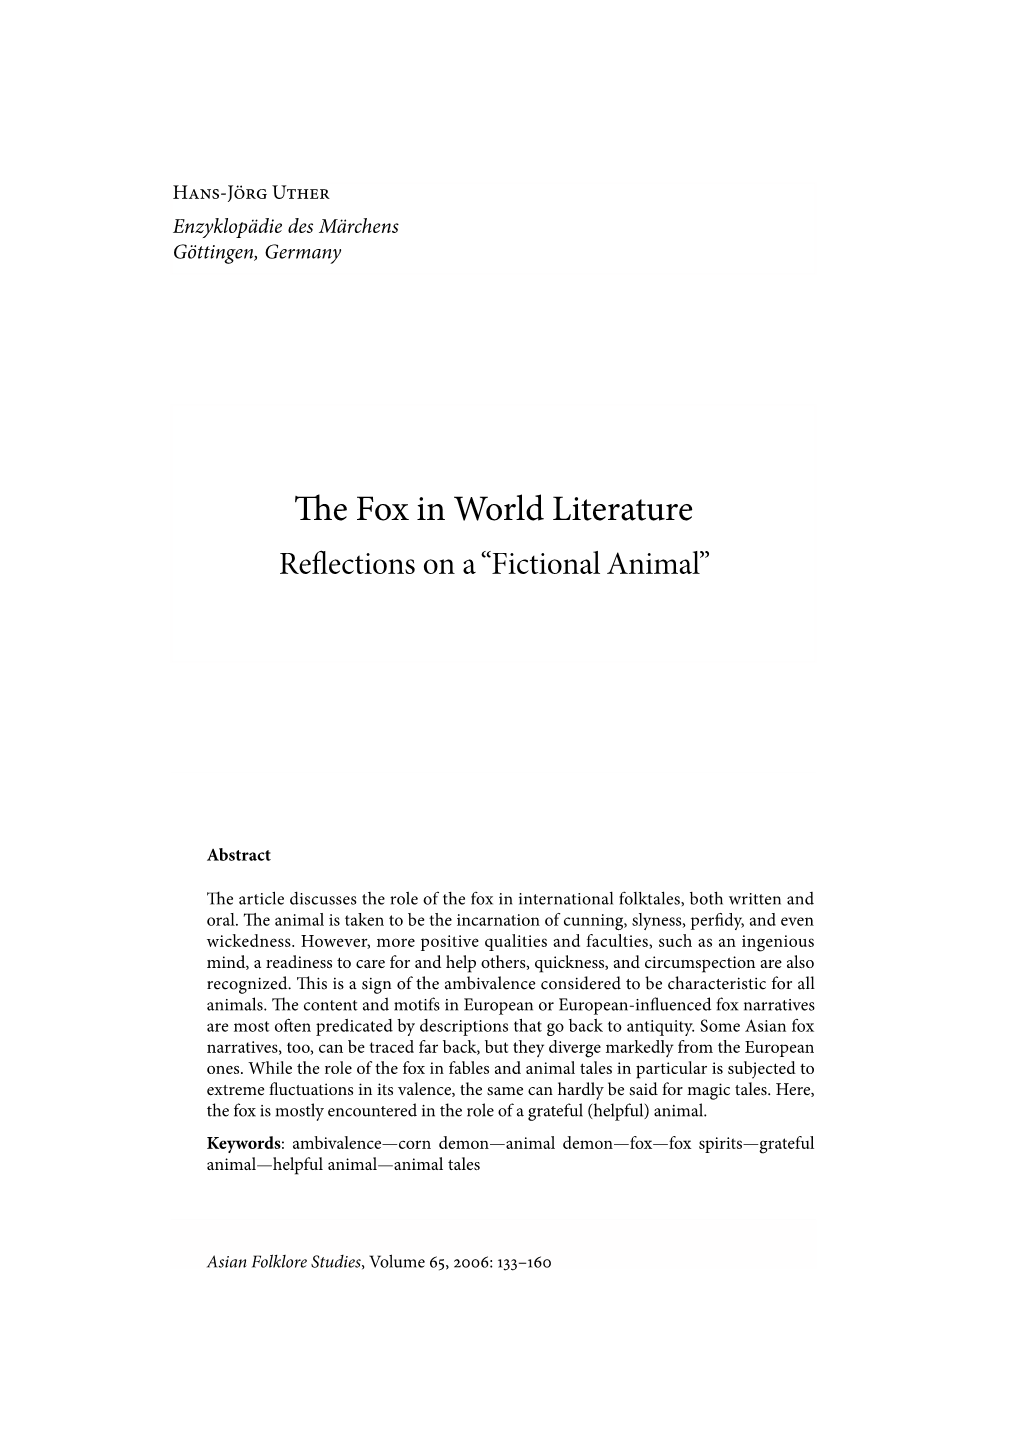 The Fox in World Literature Reflections on a “Fictional Animal”